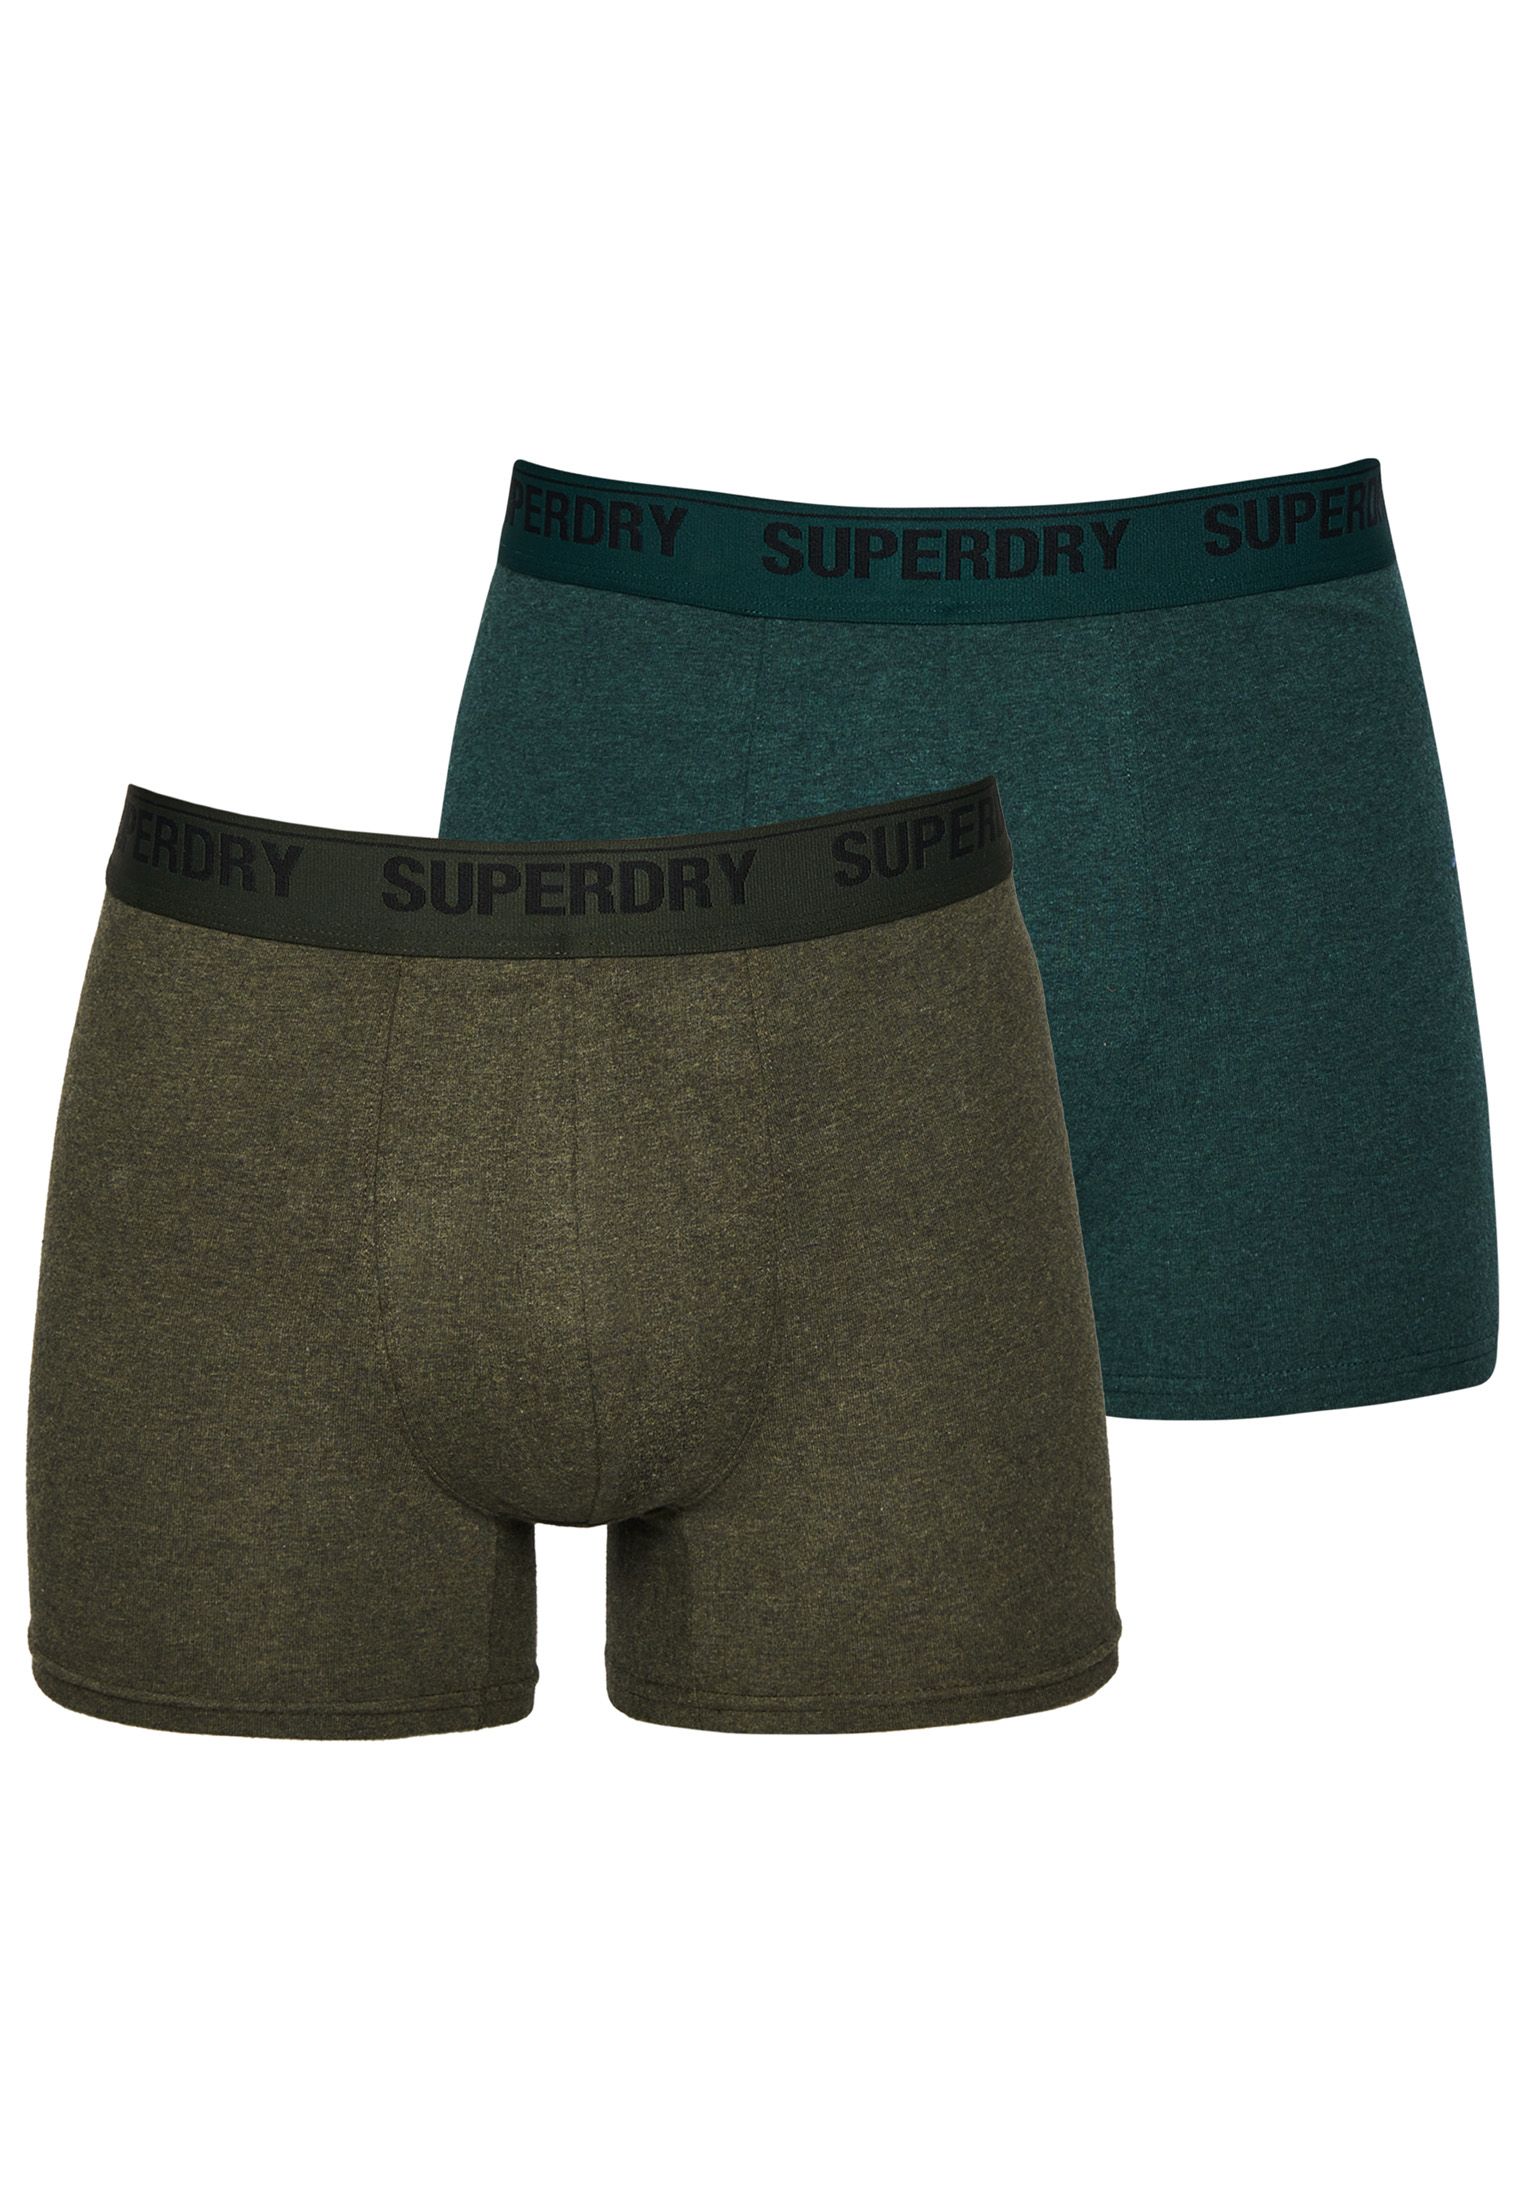 The Organic Cotton boxers are comfortable and stylish with a panelled and fitted design, featuring an elasticated waistband and our signature branding to ensure you feel your best. This double pack is a reliable way to expand your wardrobe basics.Elasticated waistbandBoxer styleSignature brandingMade with organic cotton grown using natural rather than chemical pesticides and fertilisers. The healthier soil this creates uses up to 80% less water which is better for our planet and for the farmers who grow it.